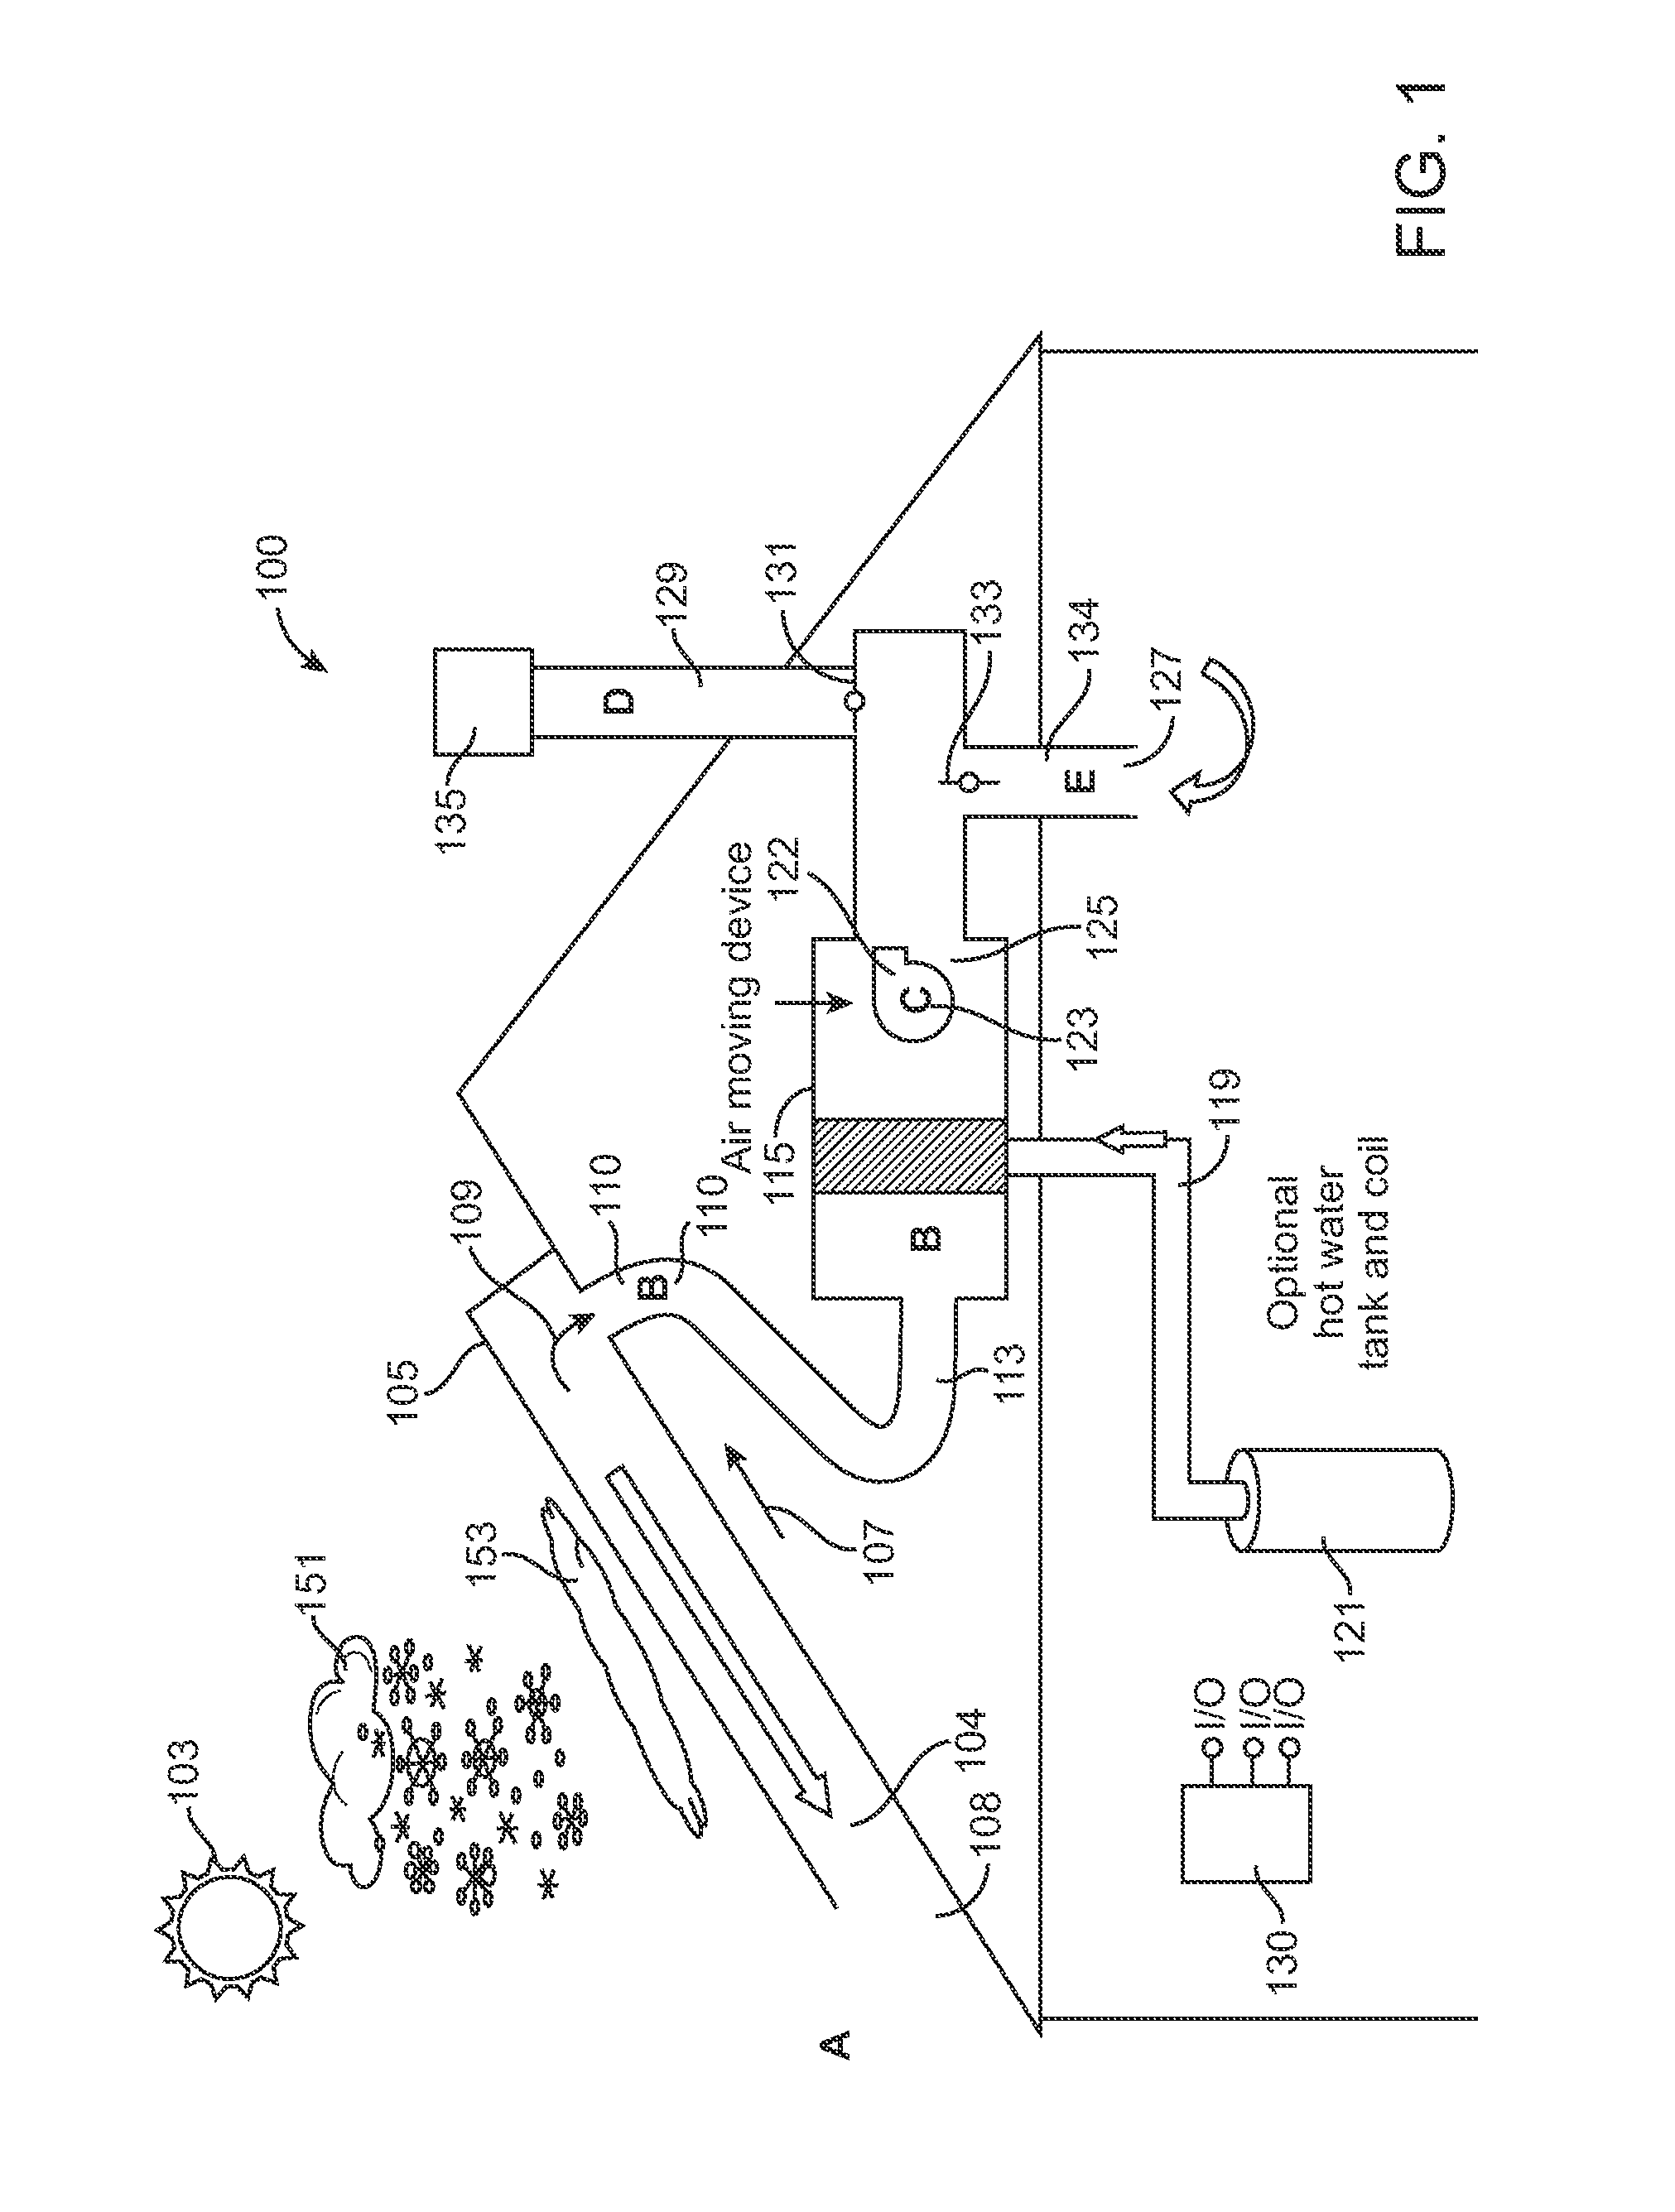 Method and system for operating a thermal solar system using a reverse motor configuration for thawing ice